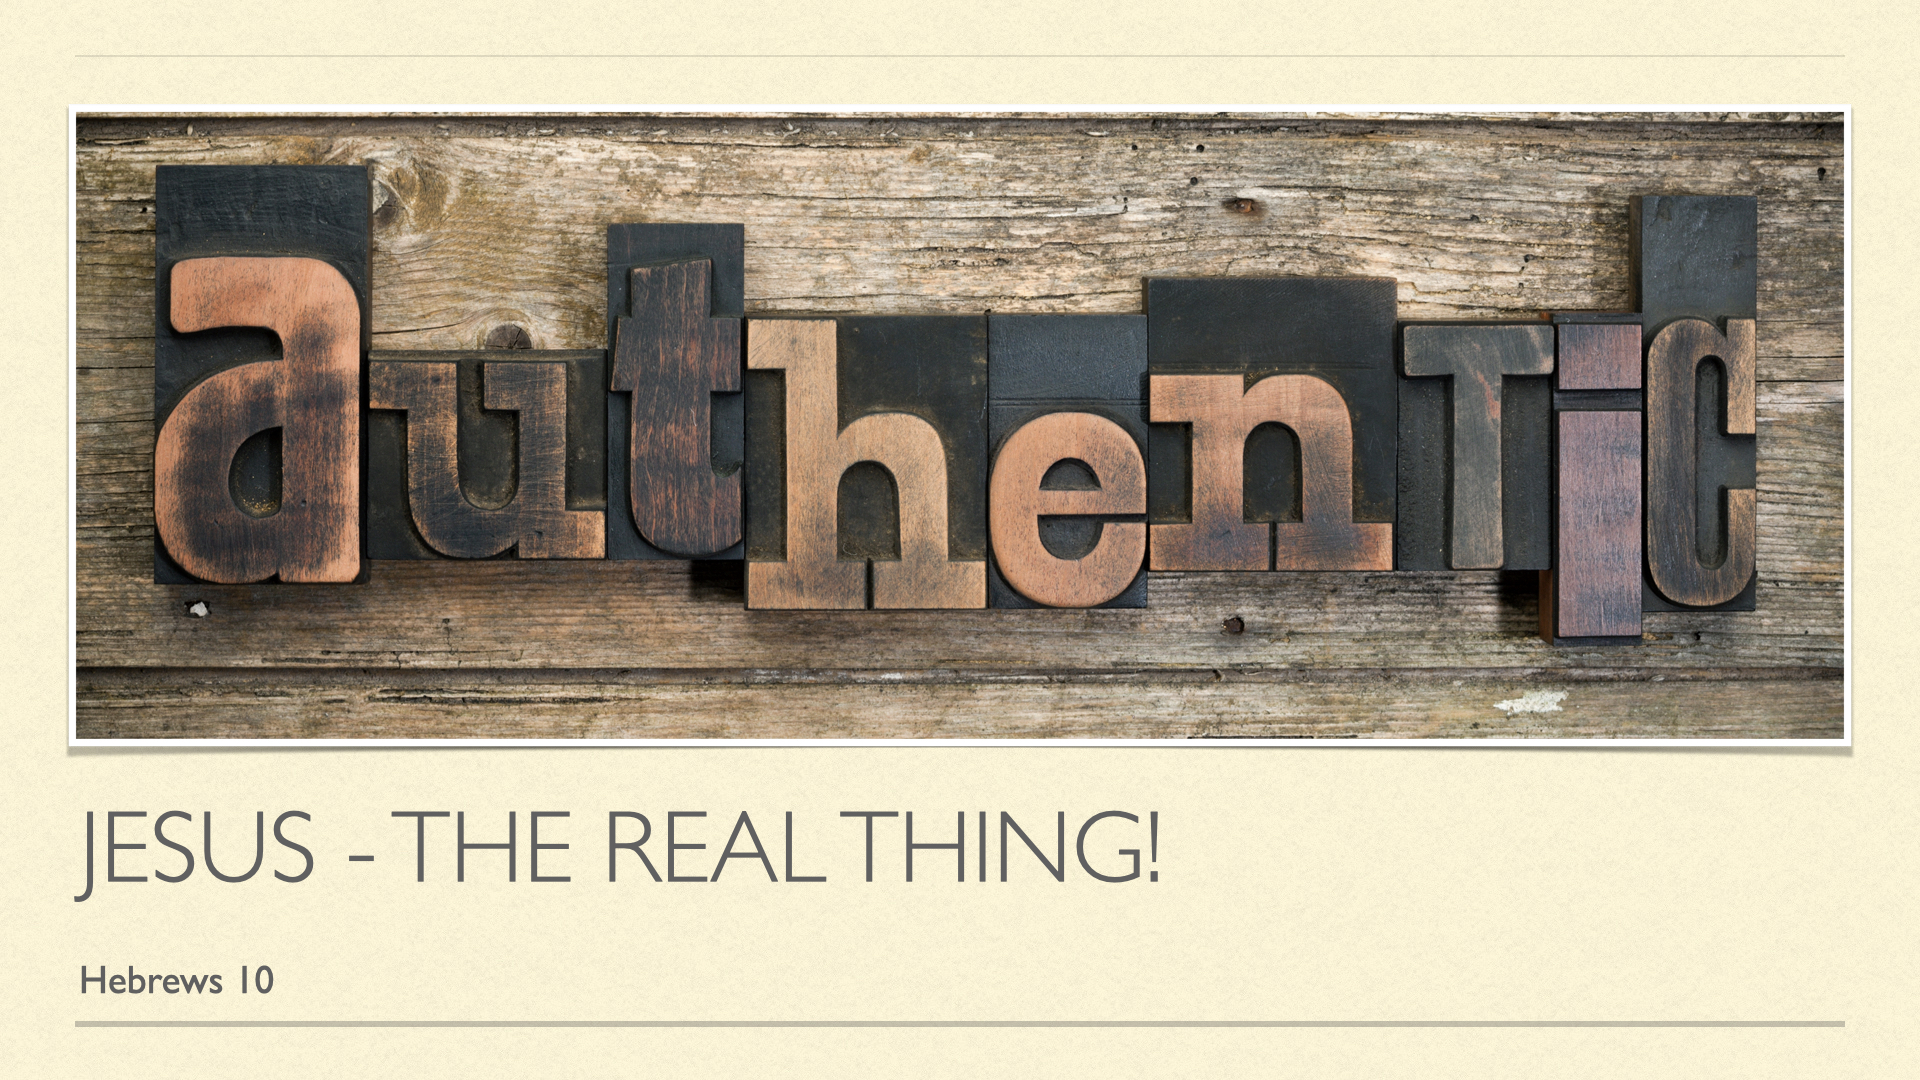 Jesus - the real thing!